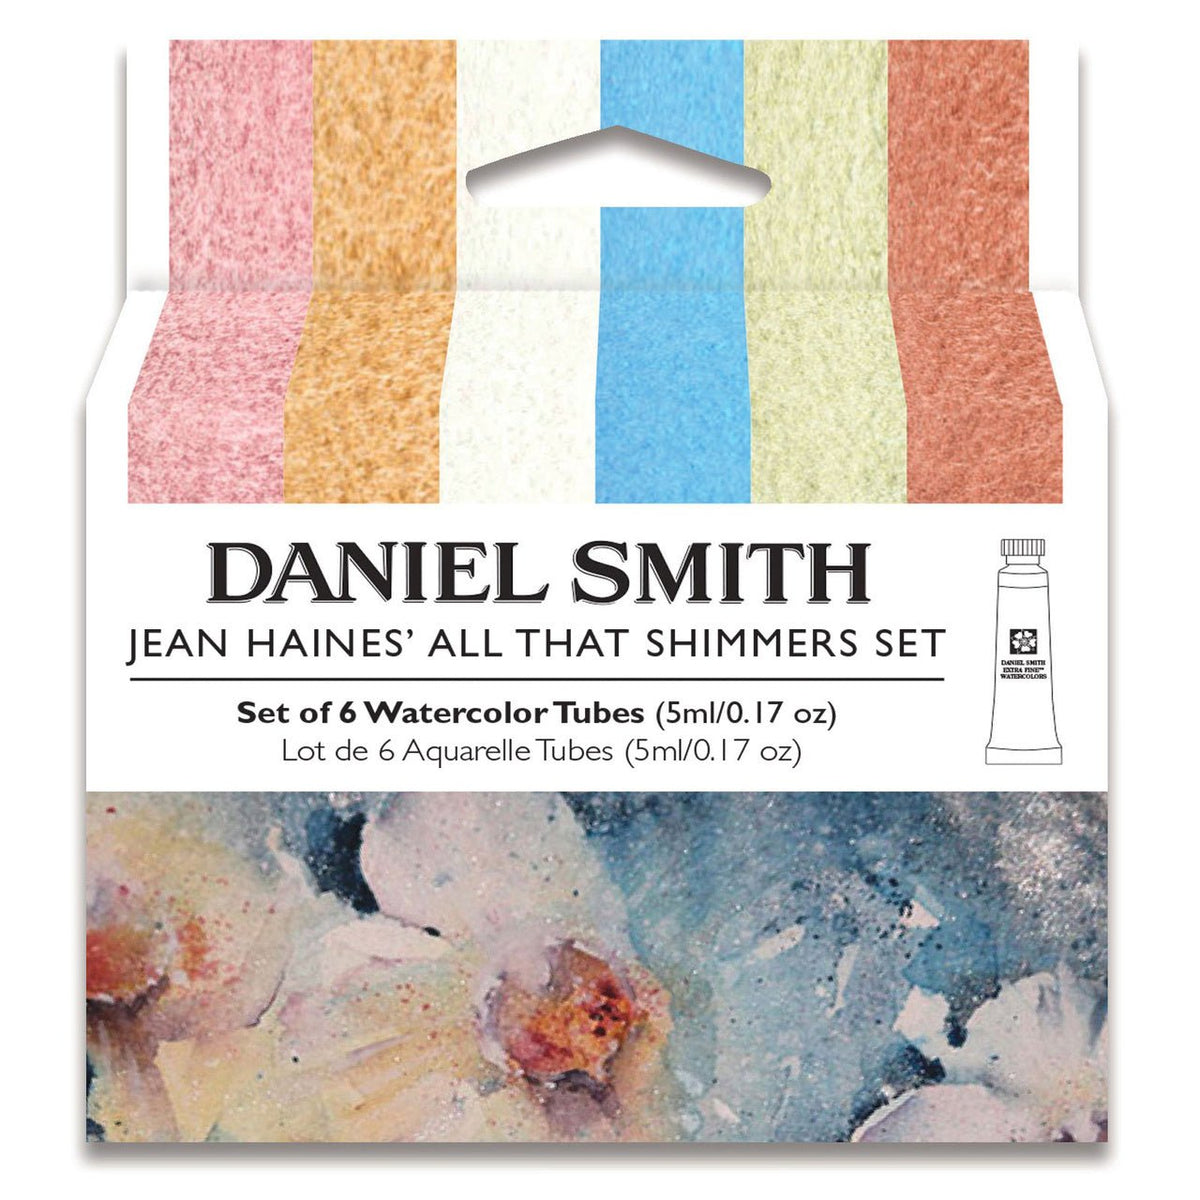 Daniel Smith Extra Fine Watercolor Set - 6 Color - Jean Haines' All That Shimmers Set (6 X 5ml tubes) - merriartist.com